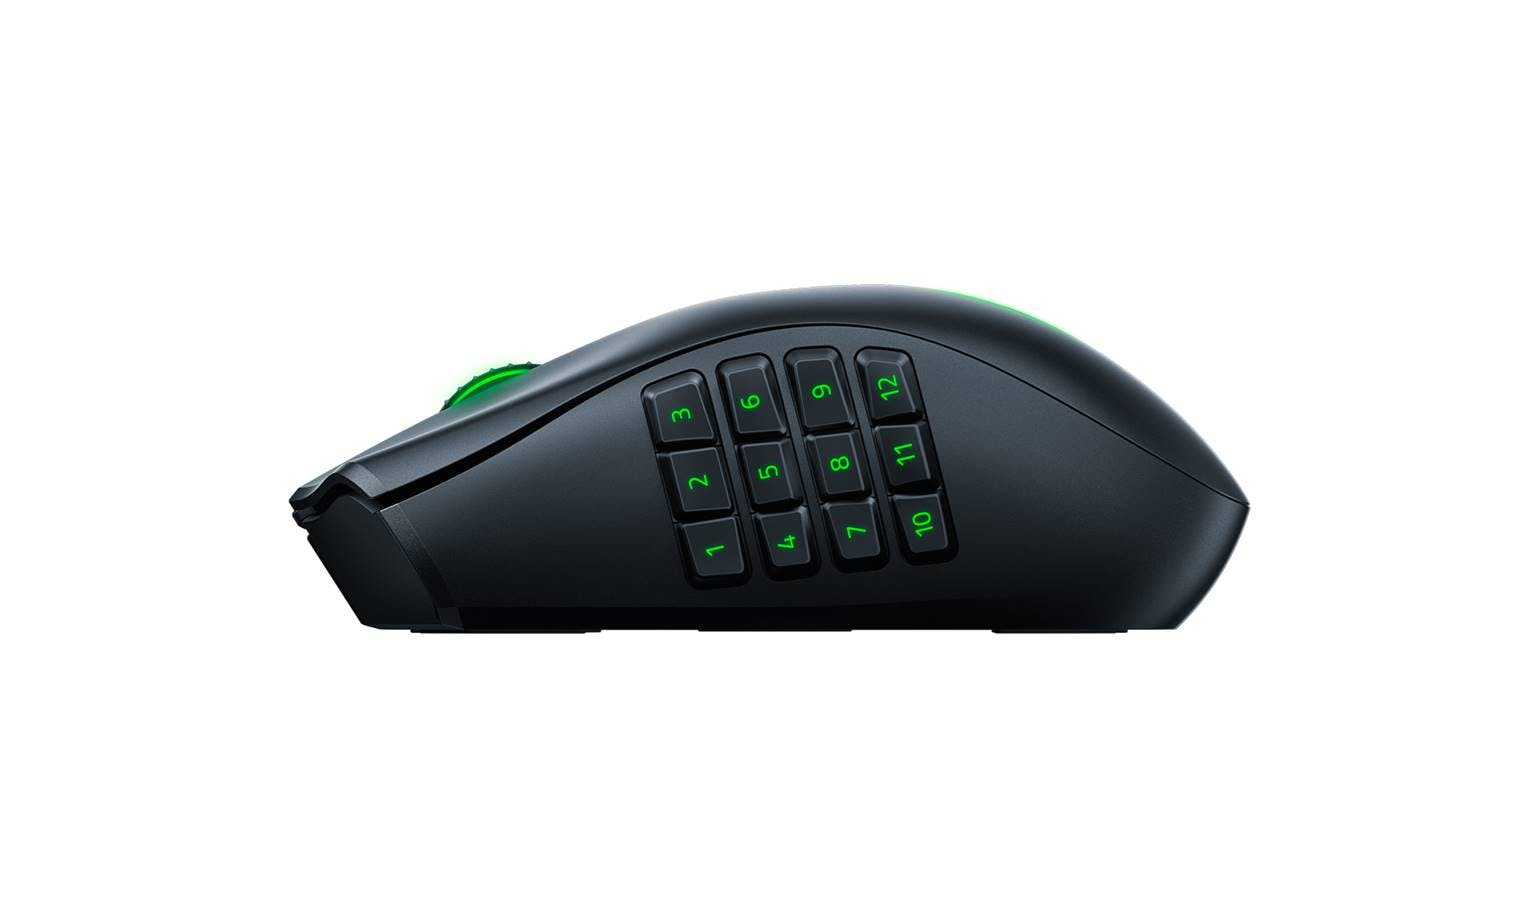 Razer Naga Pro Wireless Gaming Mouse: Interchangeable Side Plate w/ 2, 6,  12 Button Configurations - Focus+ 20K DPI Optical Sensor - Fastest Gaming